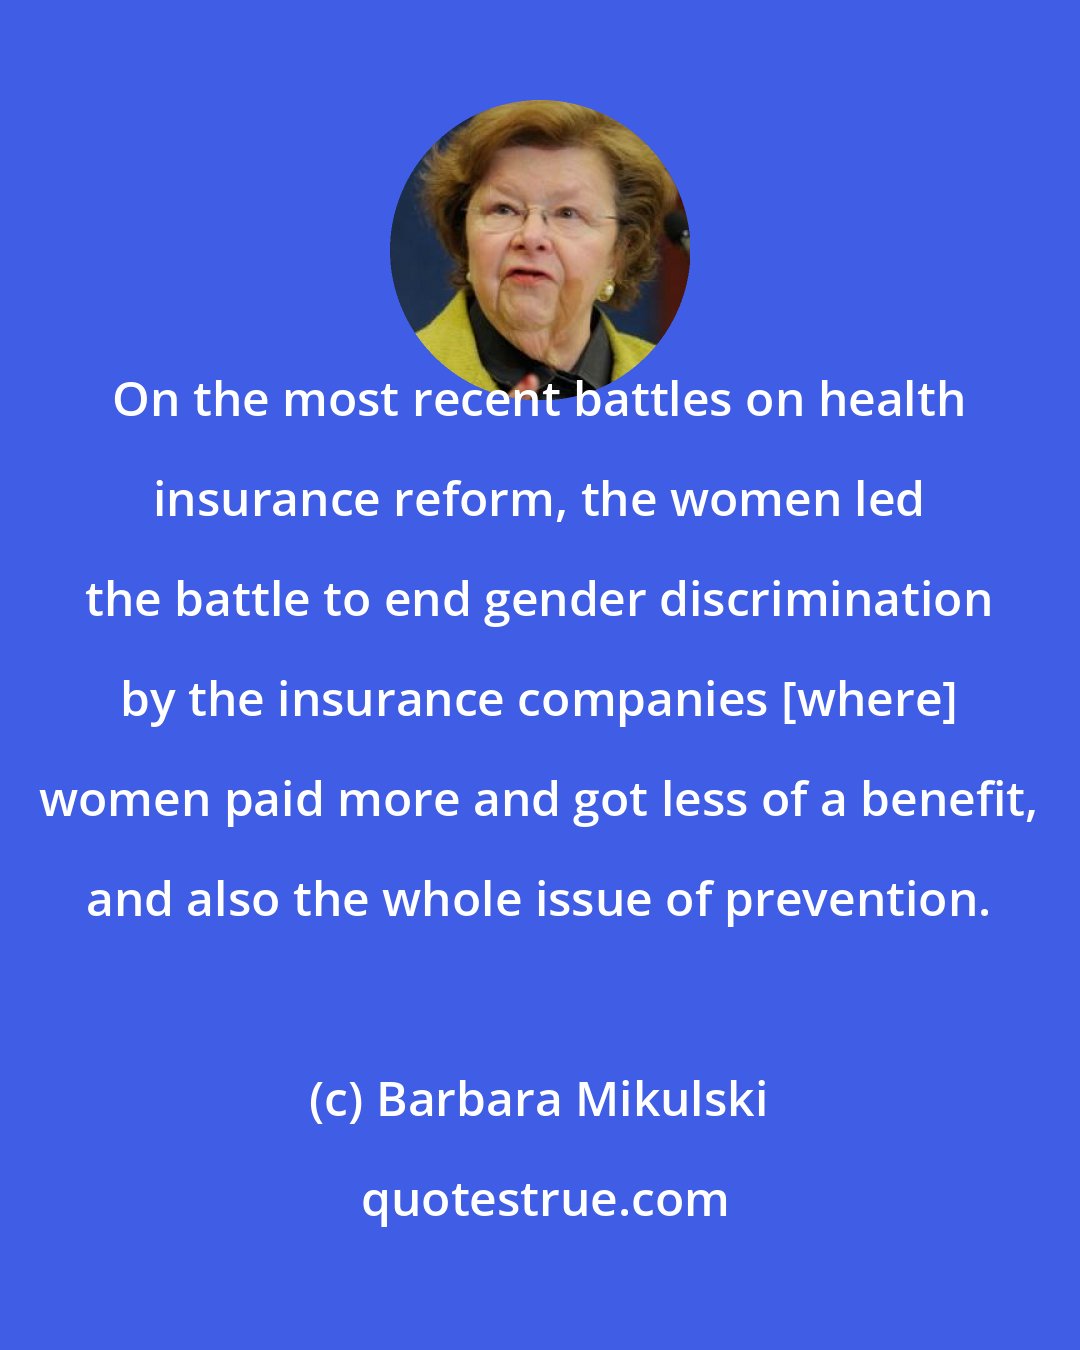 Barbara Mikulski: On the most recent battles on health insurance reform, the women led the battle to end gender discrimination by the insurance companies [where] women paid more and got less of a benefit, and also the whole issue of prevention.